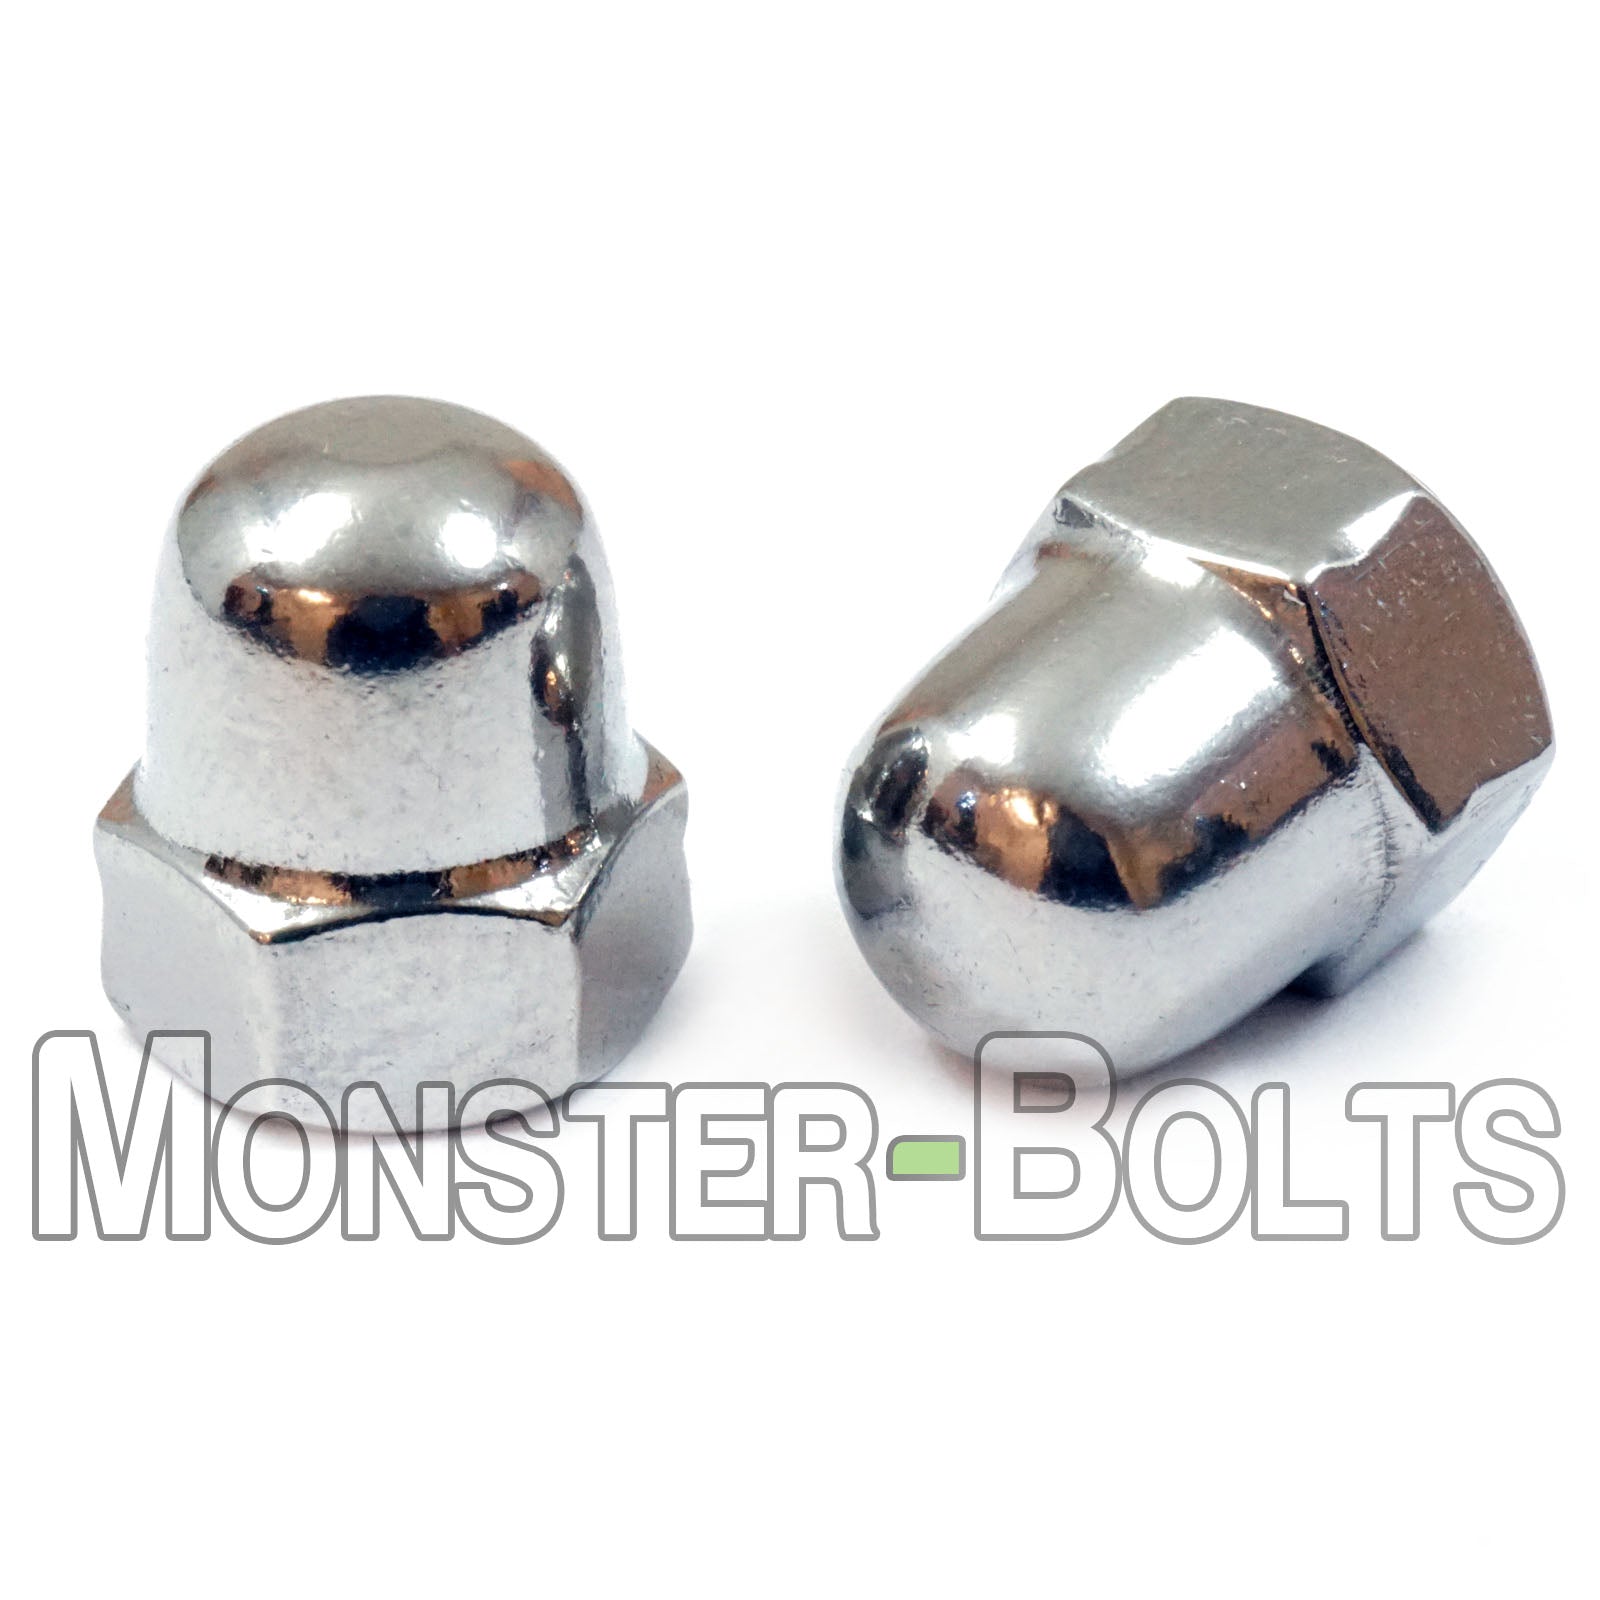 Hat nuts stainless steel A1 MP stainless DIN 1587 hat nut nut nut nuts  M3,4,5,6